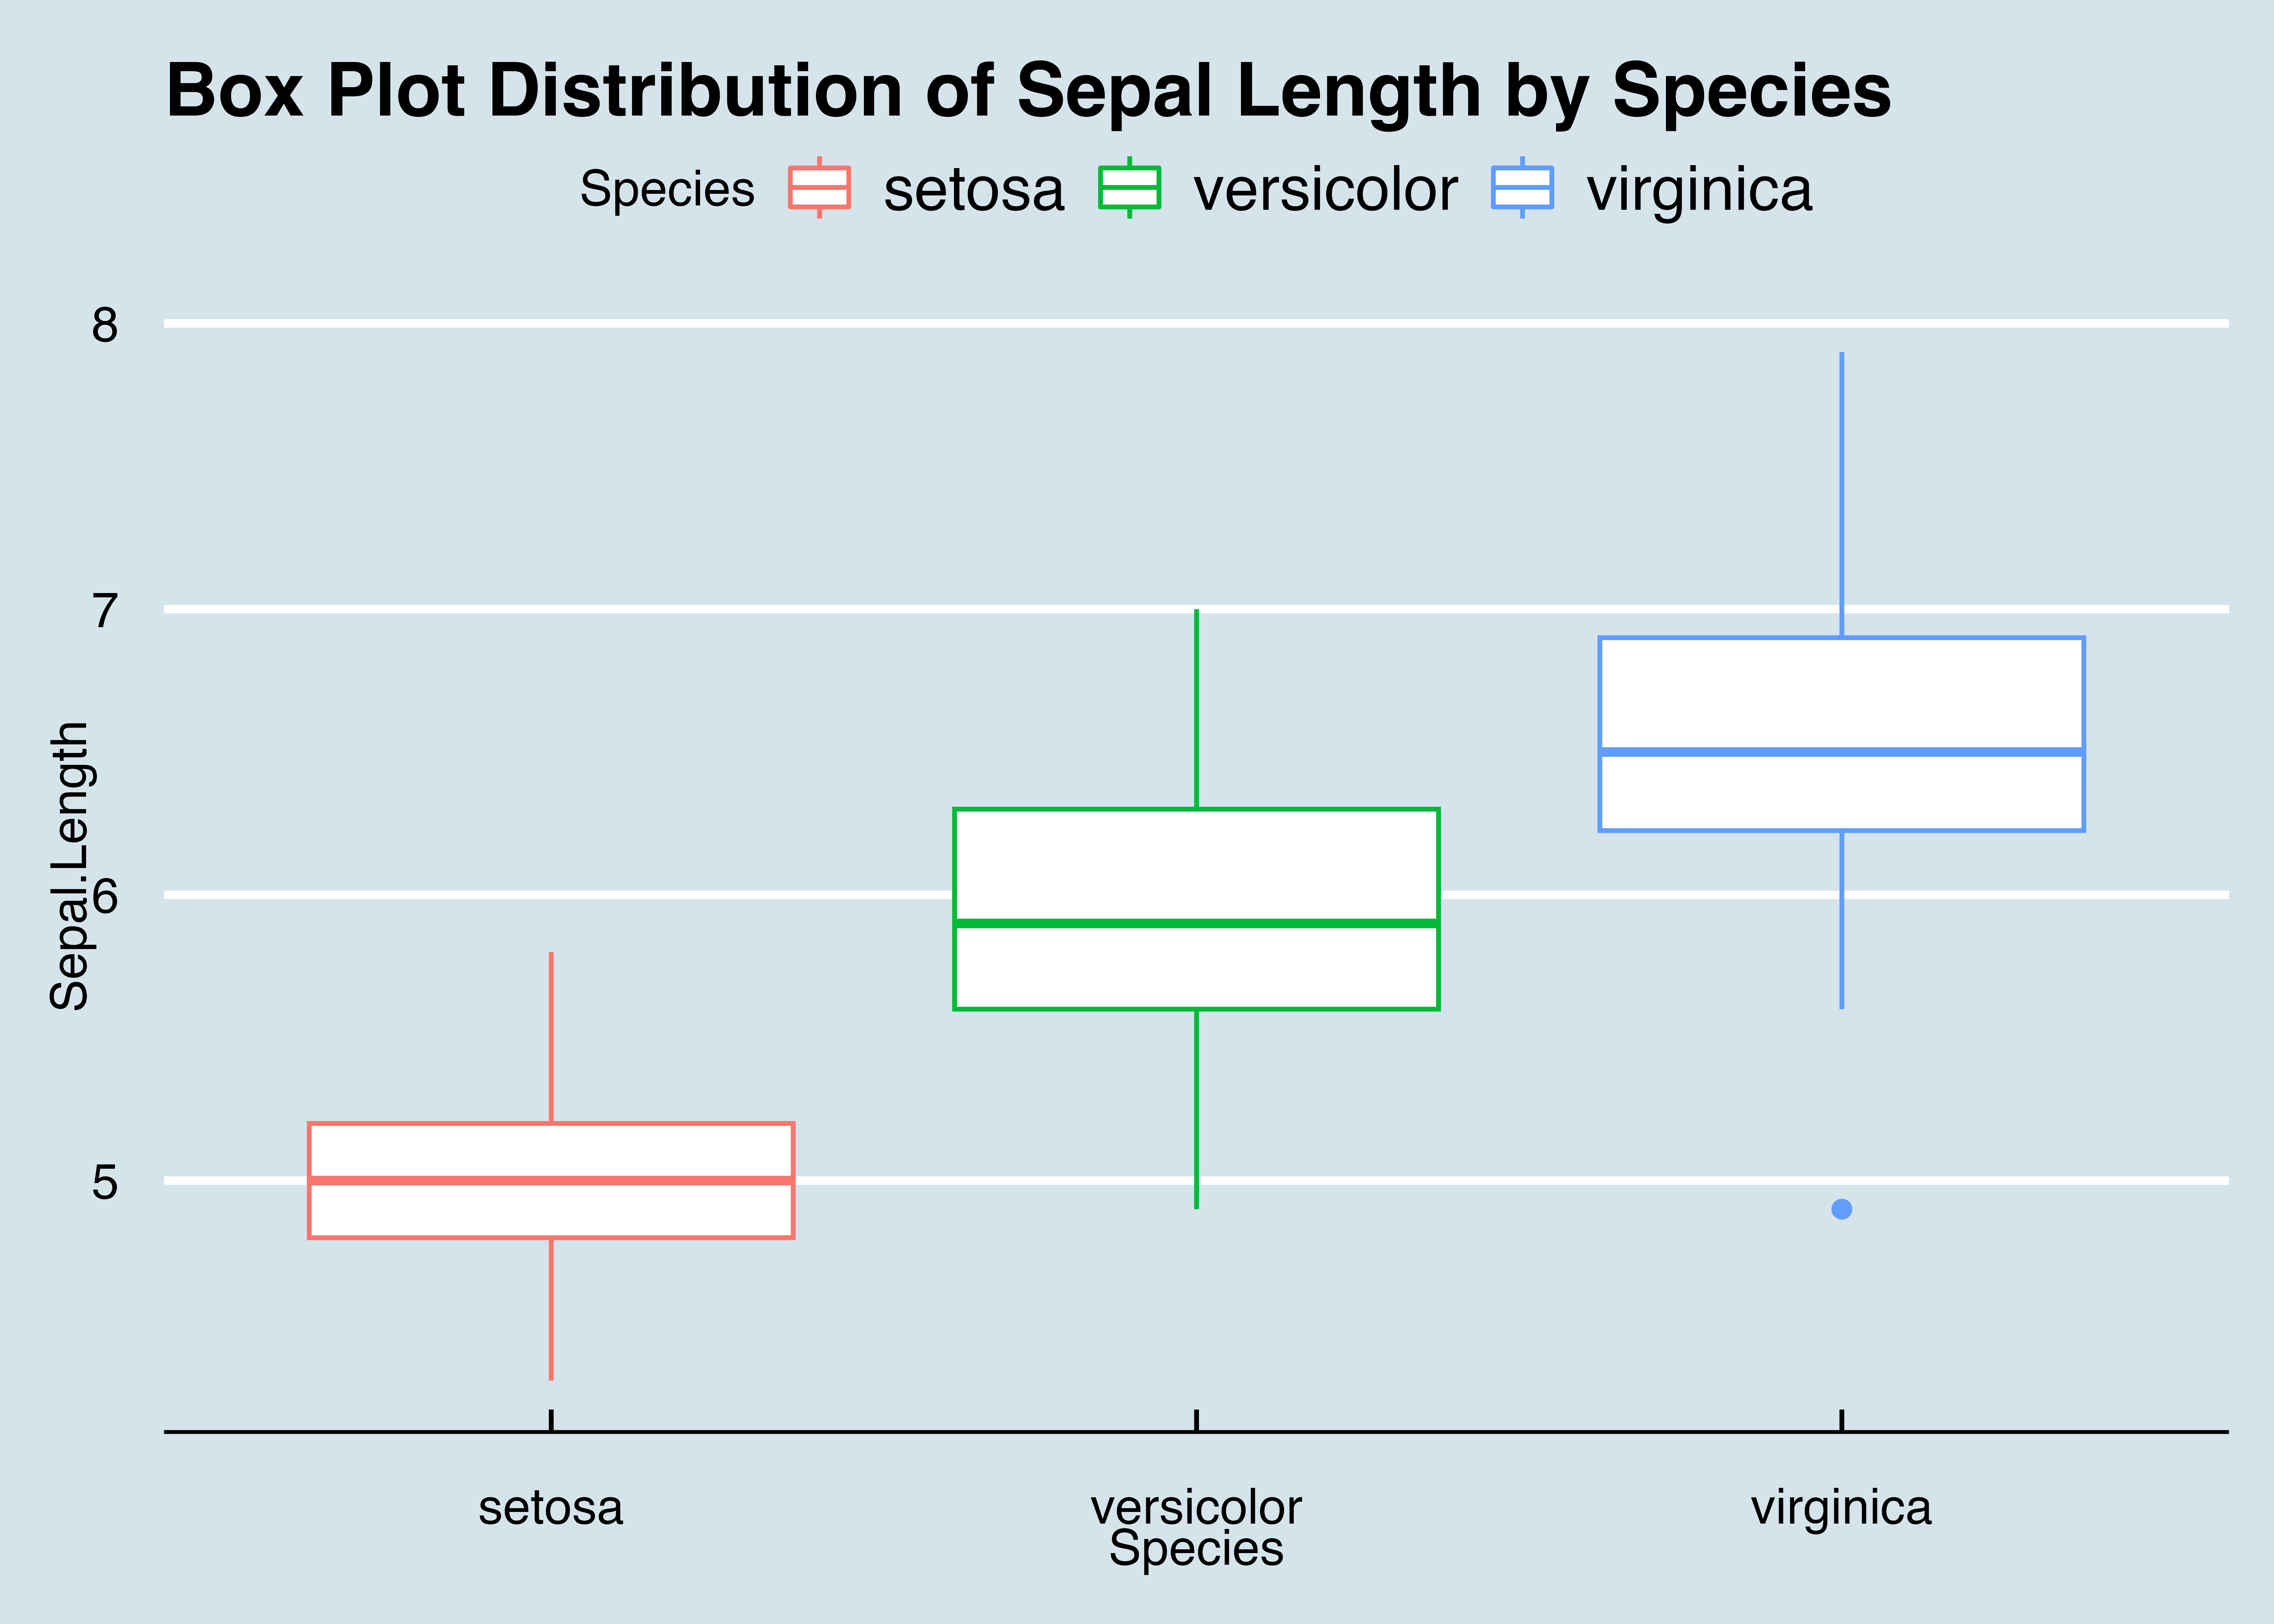 Implementation of Box Plots with ggplot2